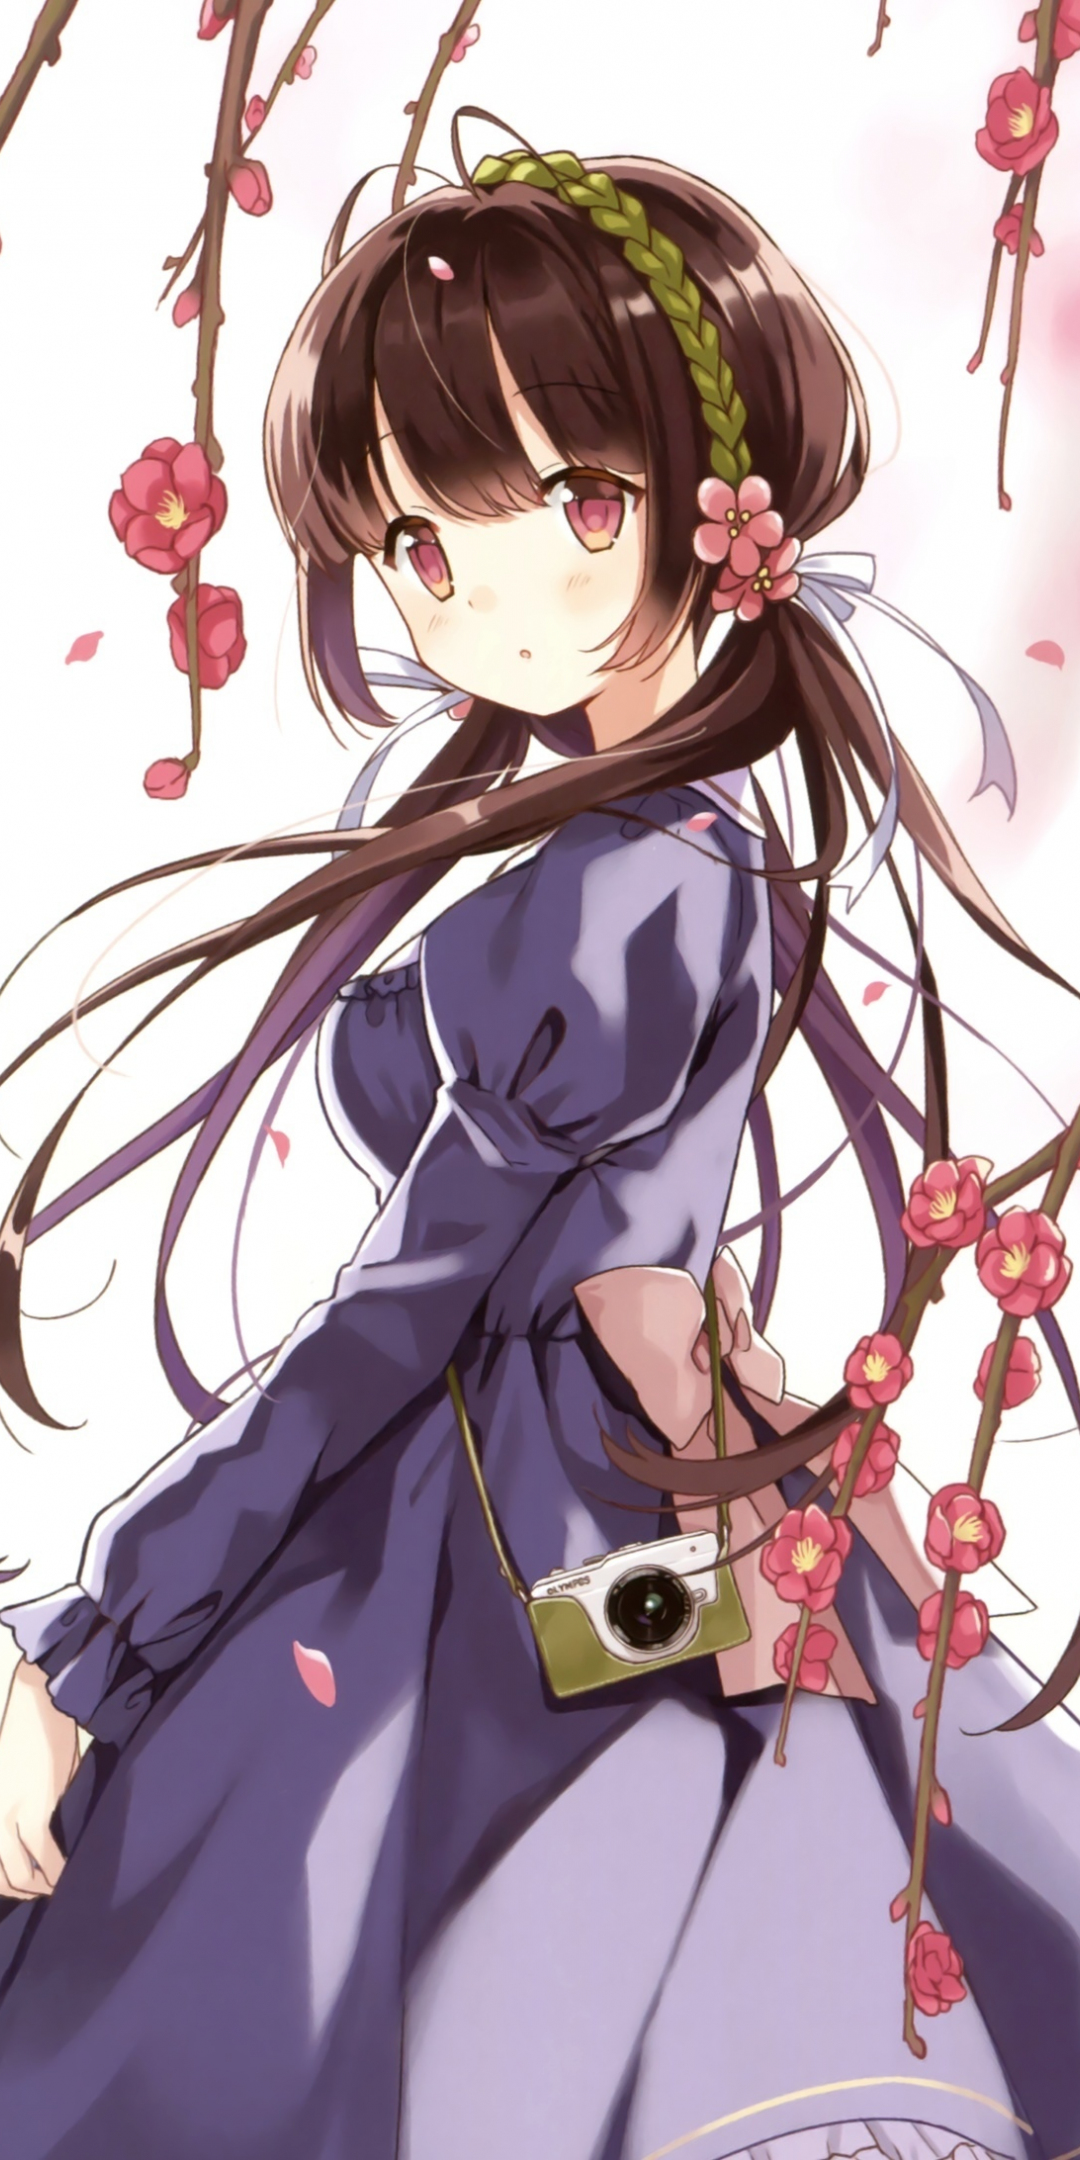 Pink eyes, blossom, outdoor, anime girl, 1080x2160 wallpaper